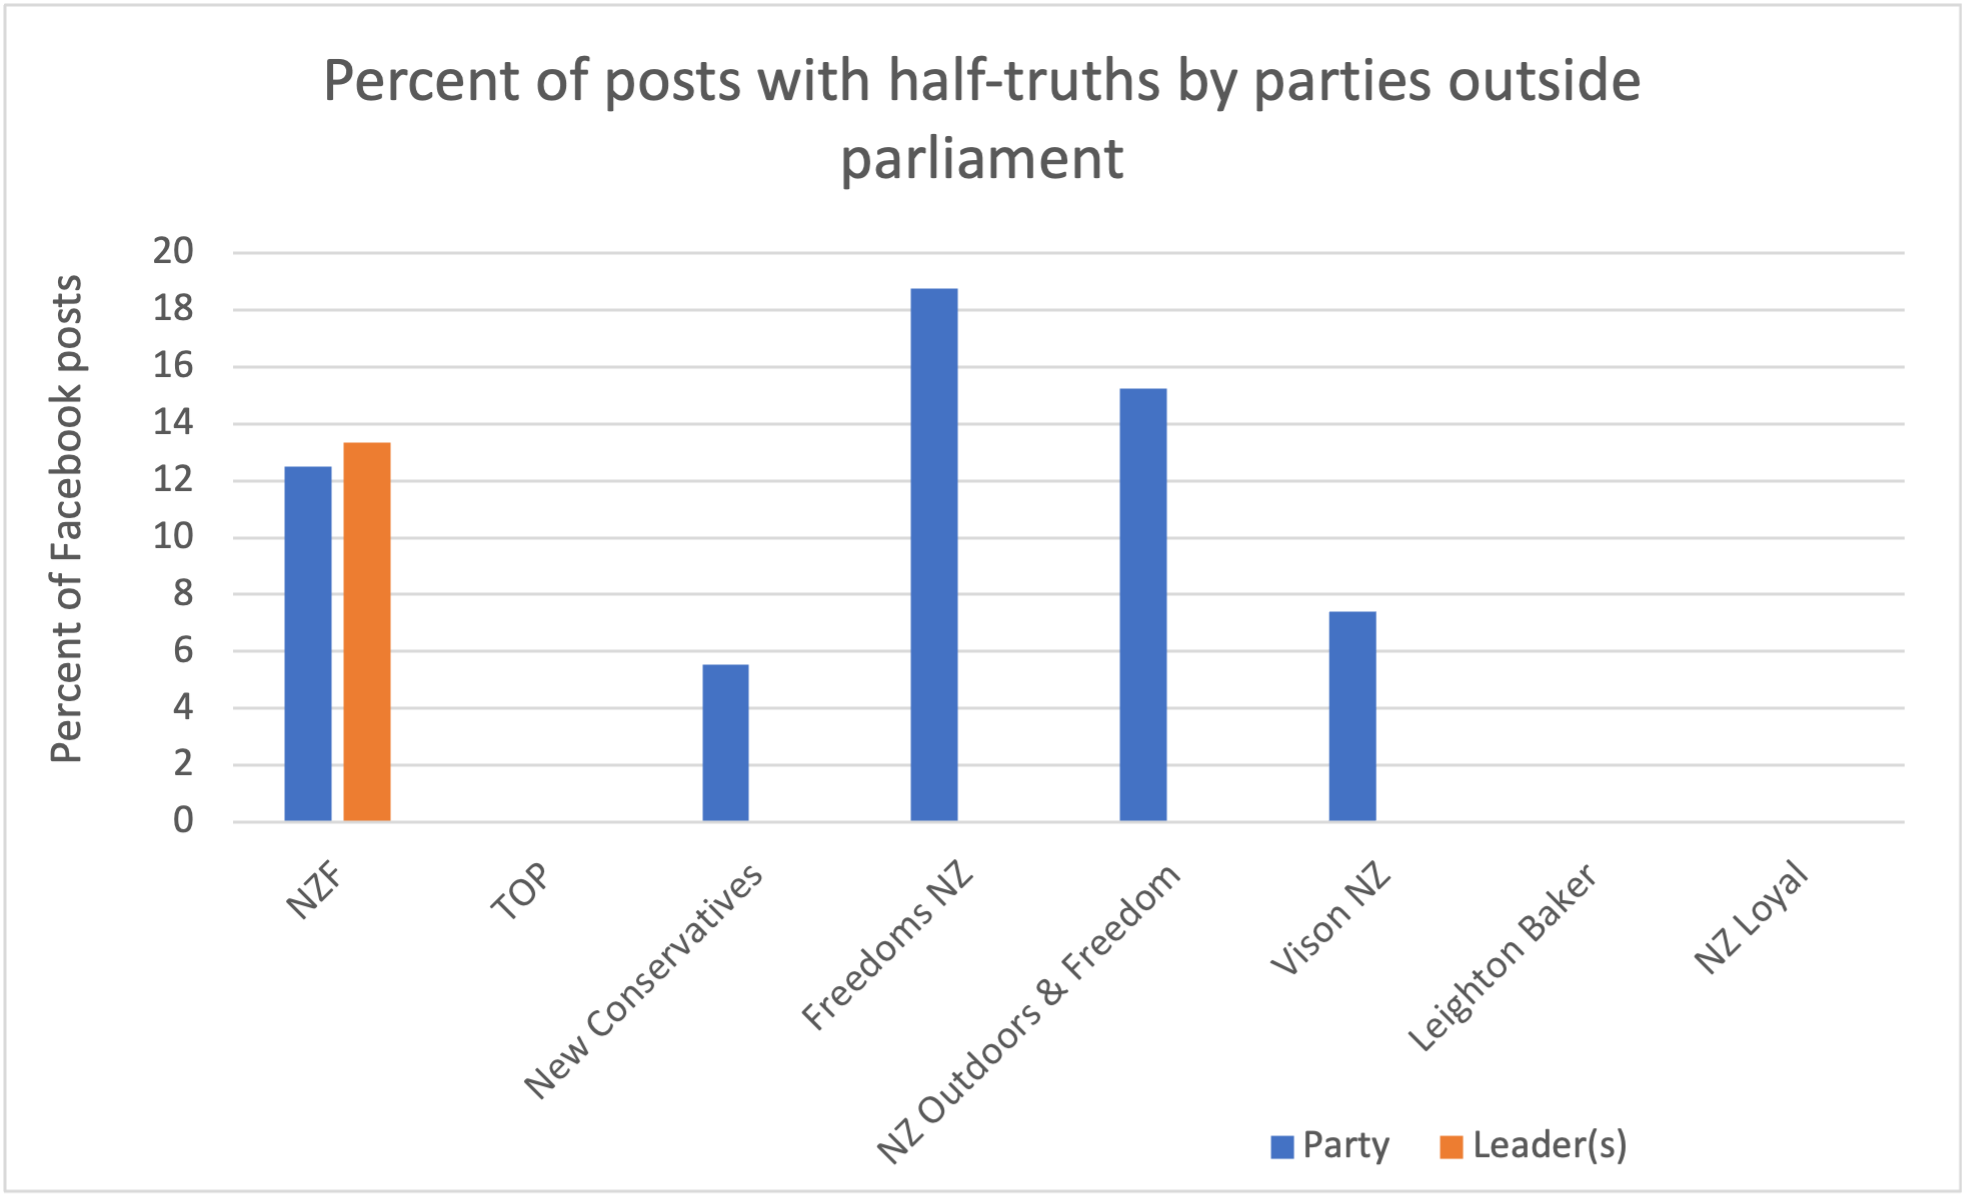 Percent of posts with half-truths by parties outside parliament